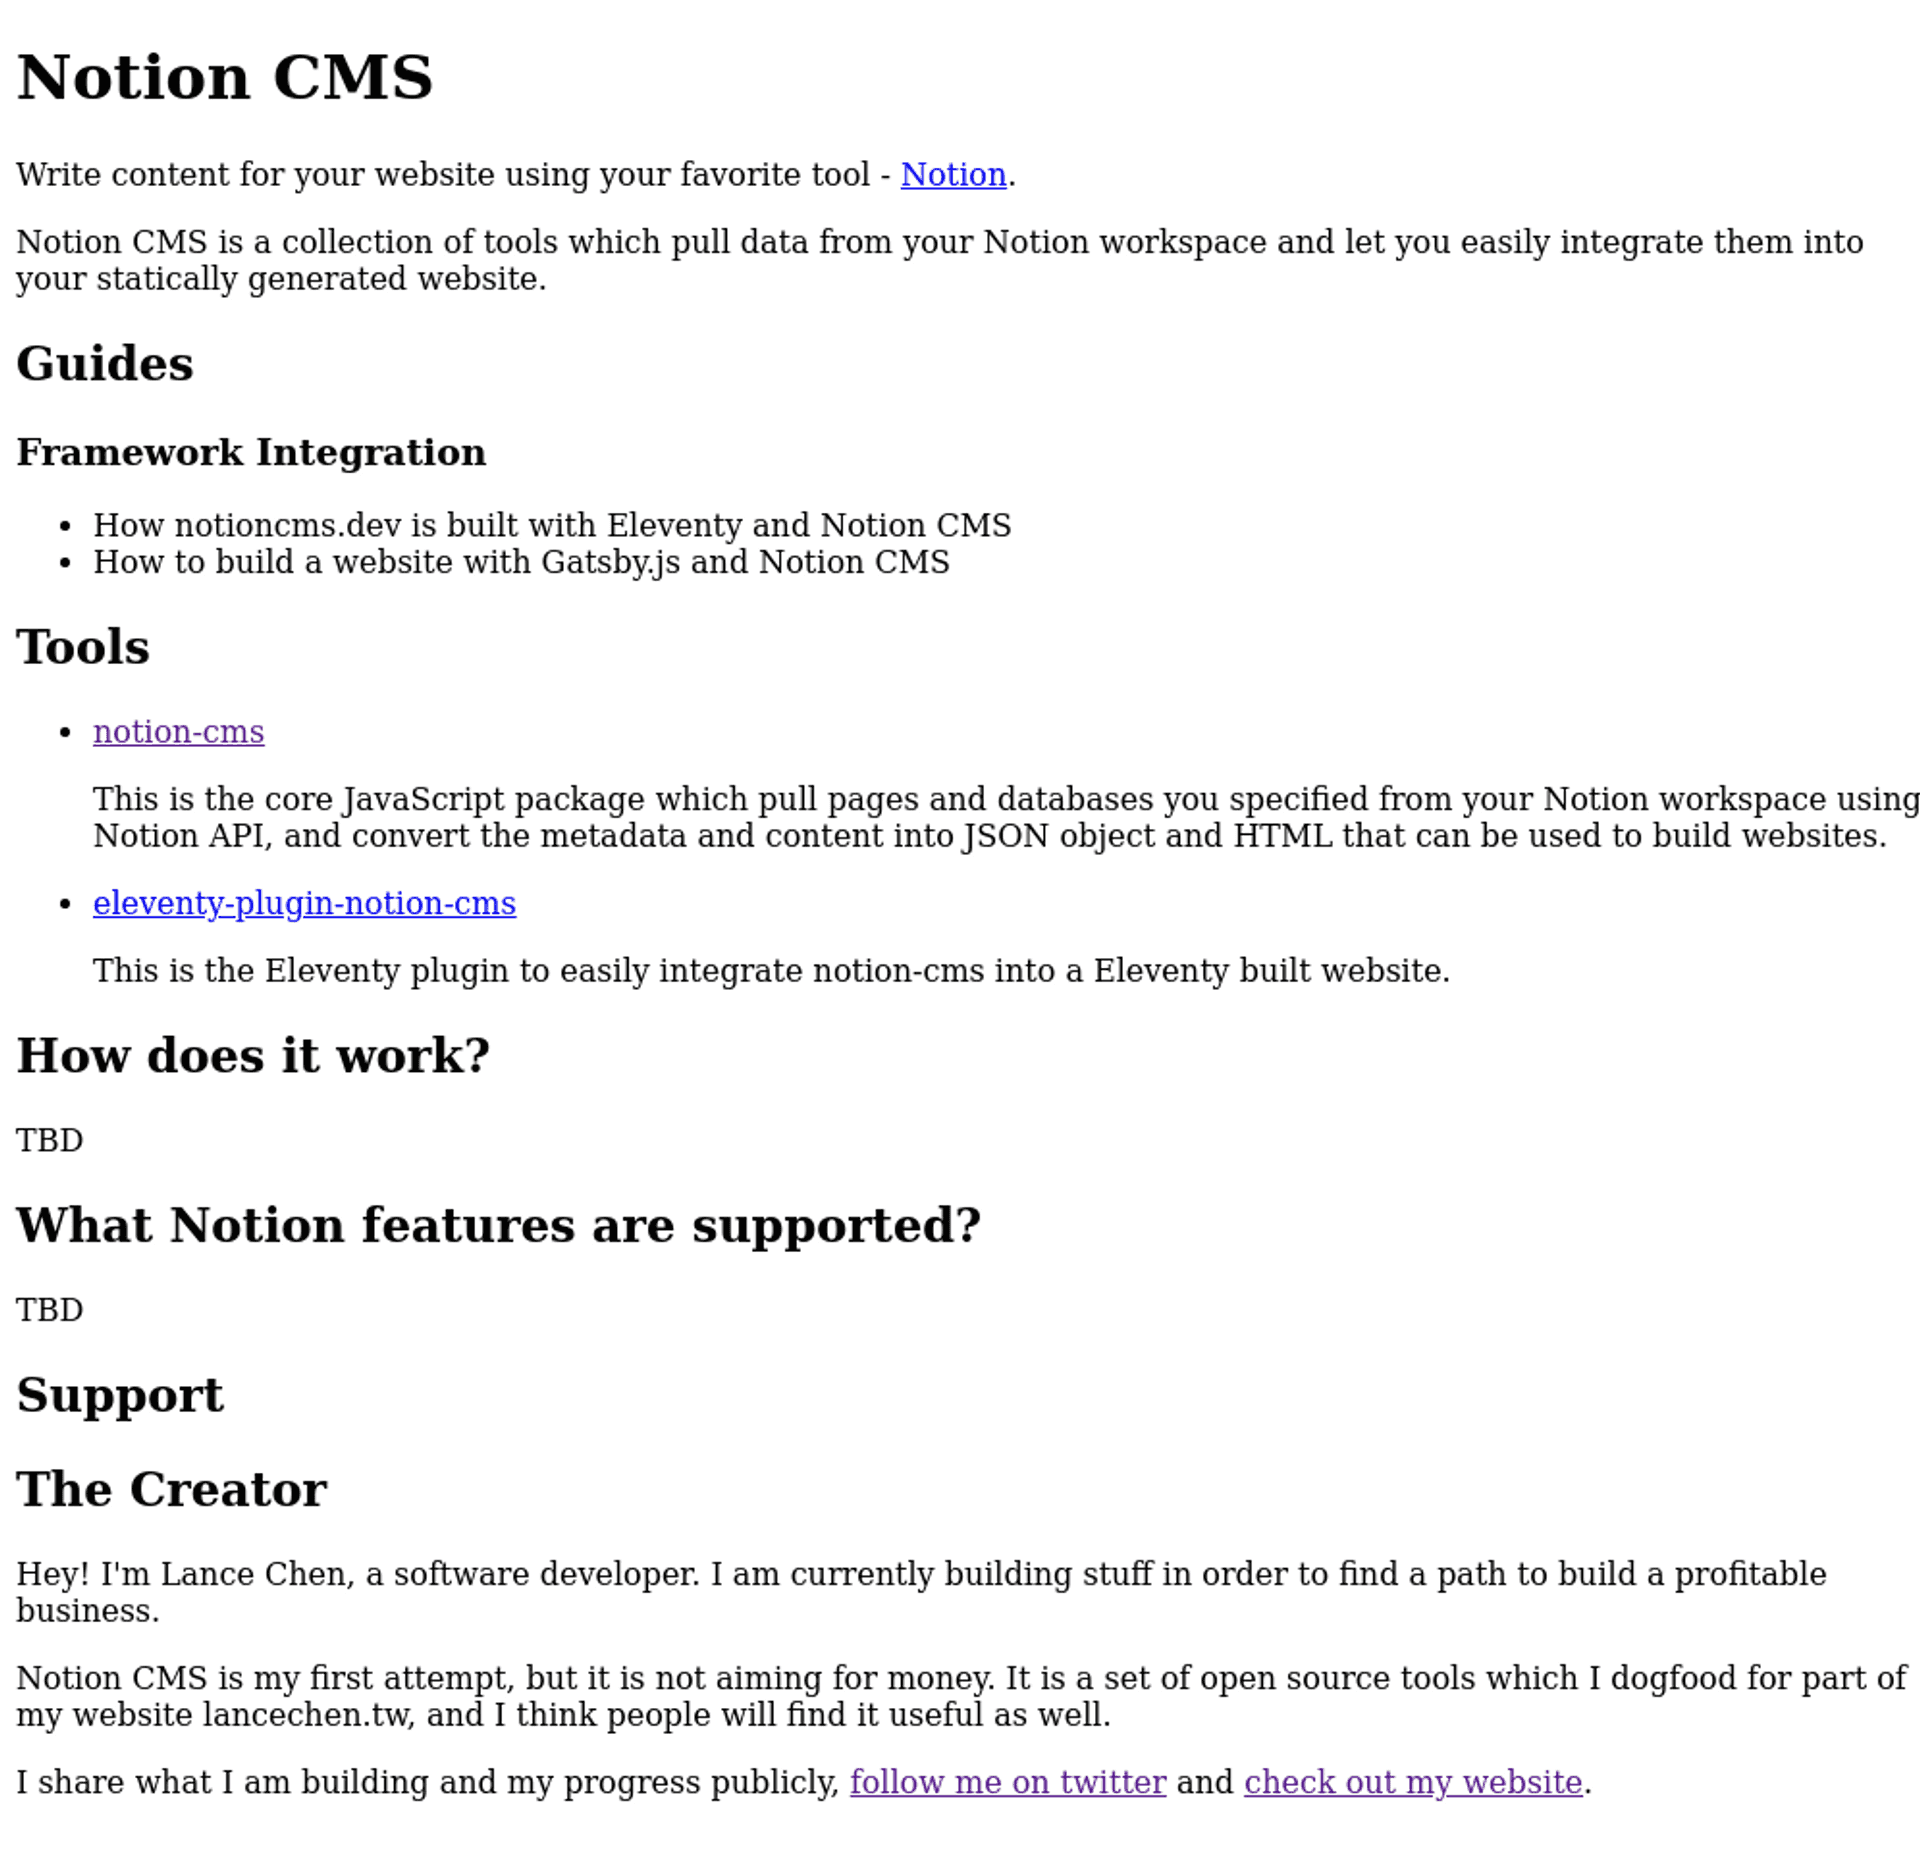 Notion CMS landing page content